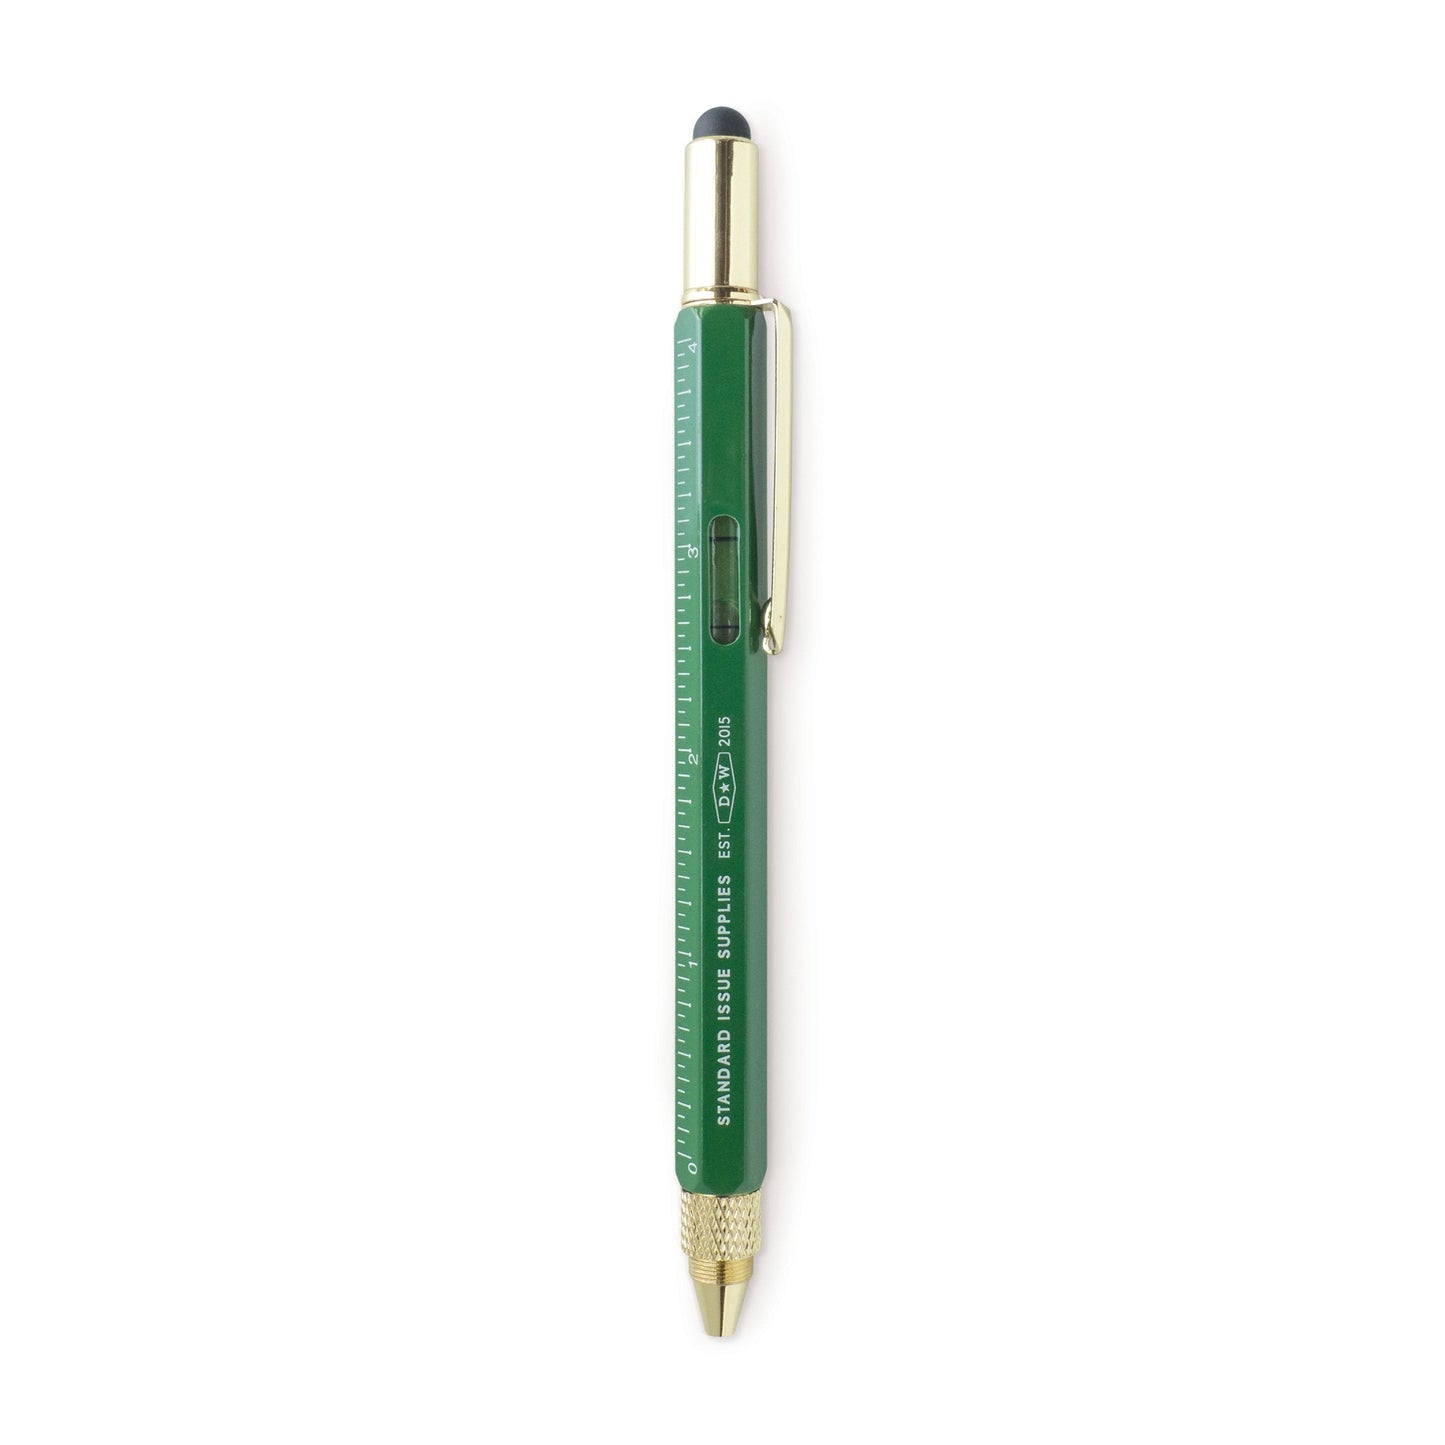 Green tool multi function tool pen from the Pencil Me In stationery shop